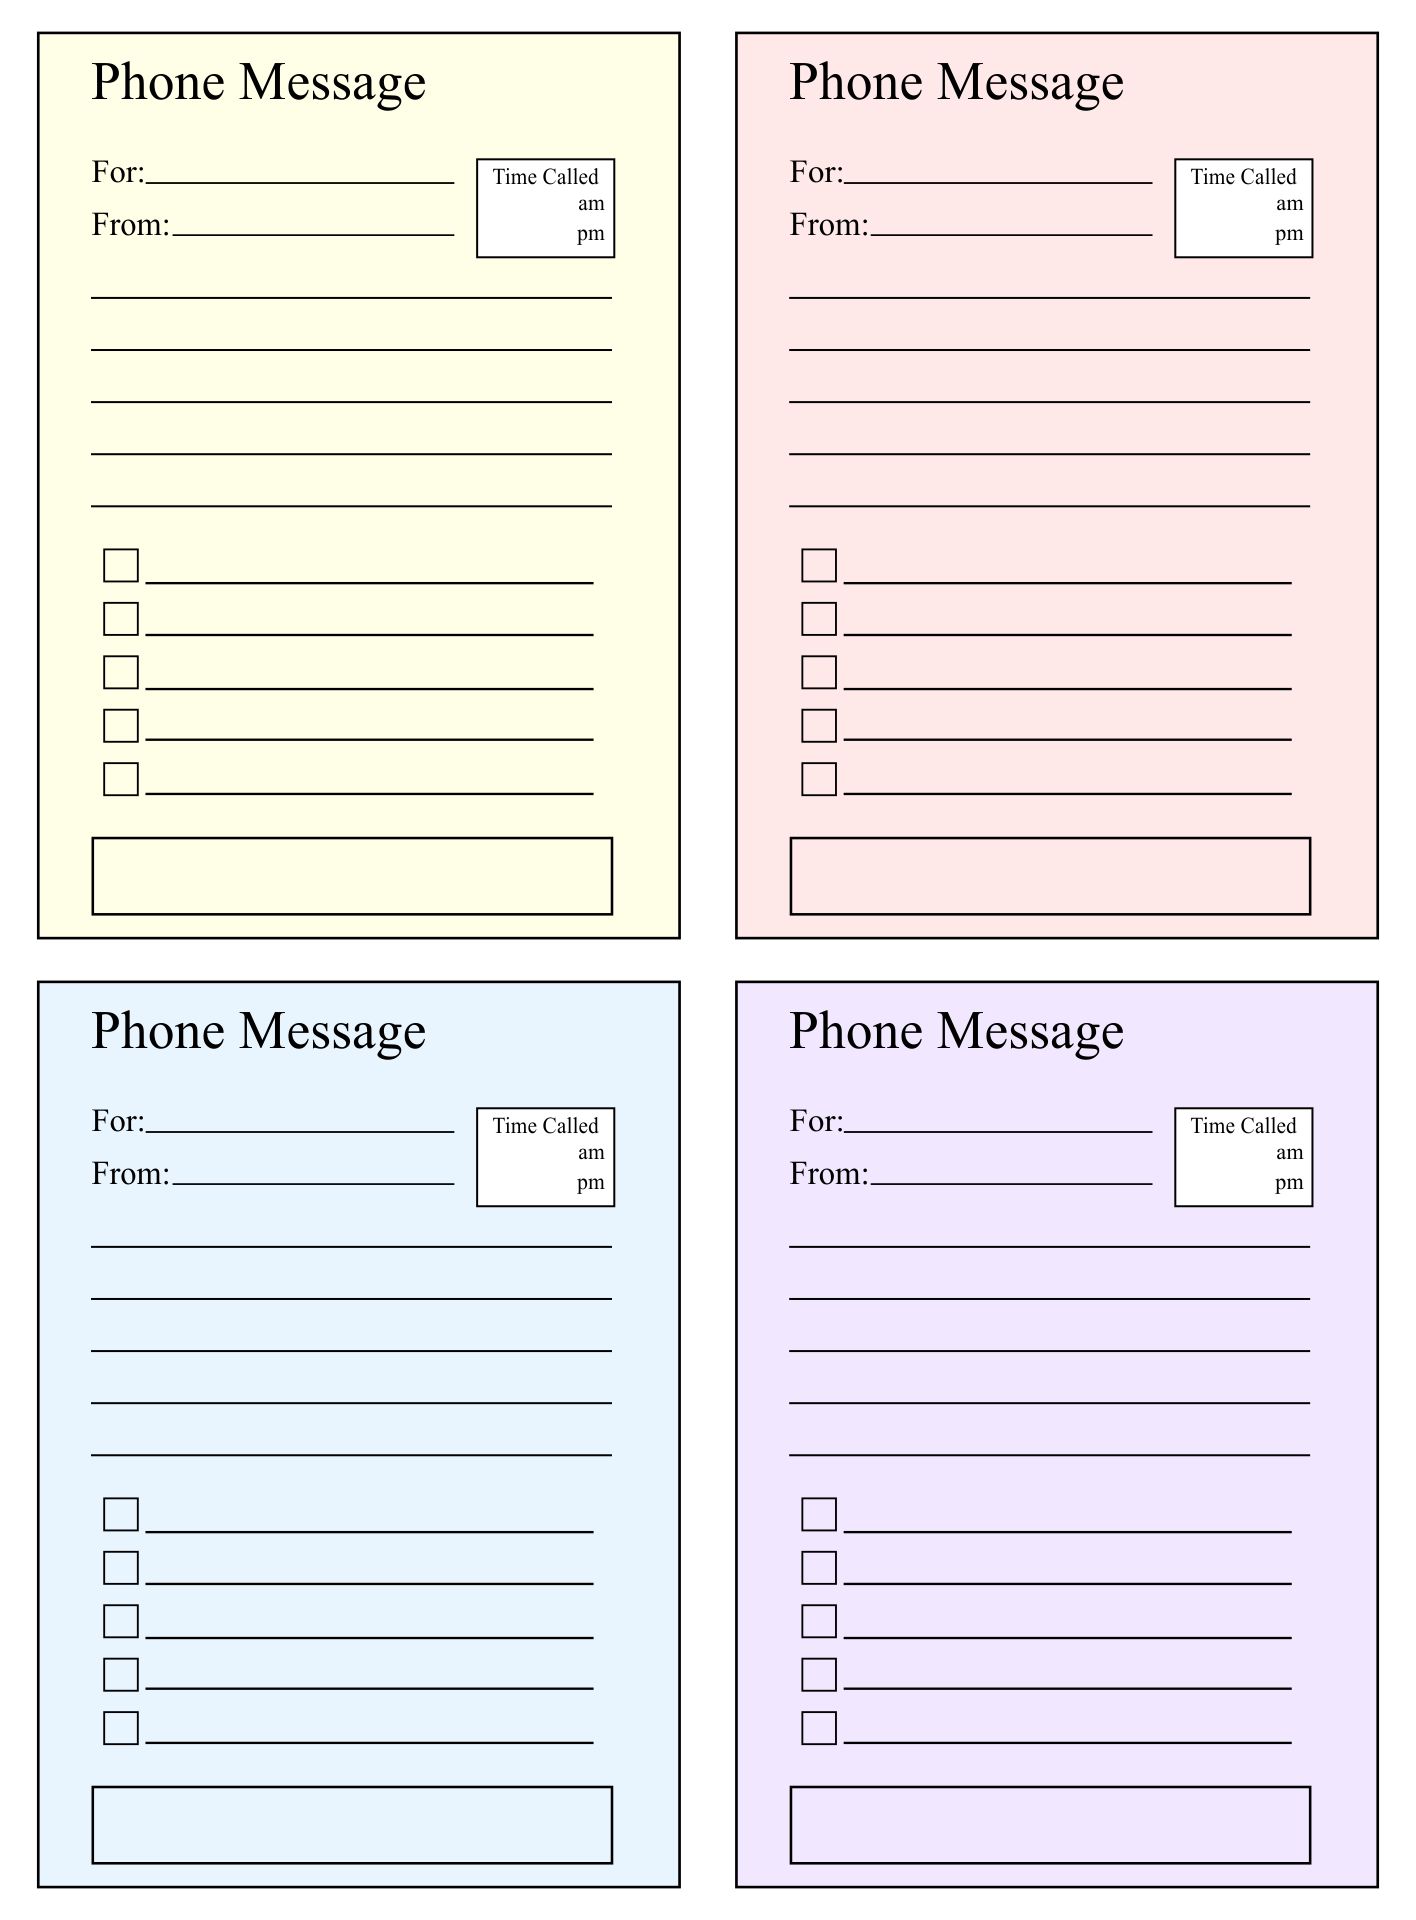 telephone-message-template-free